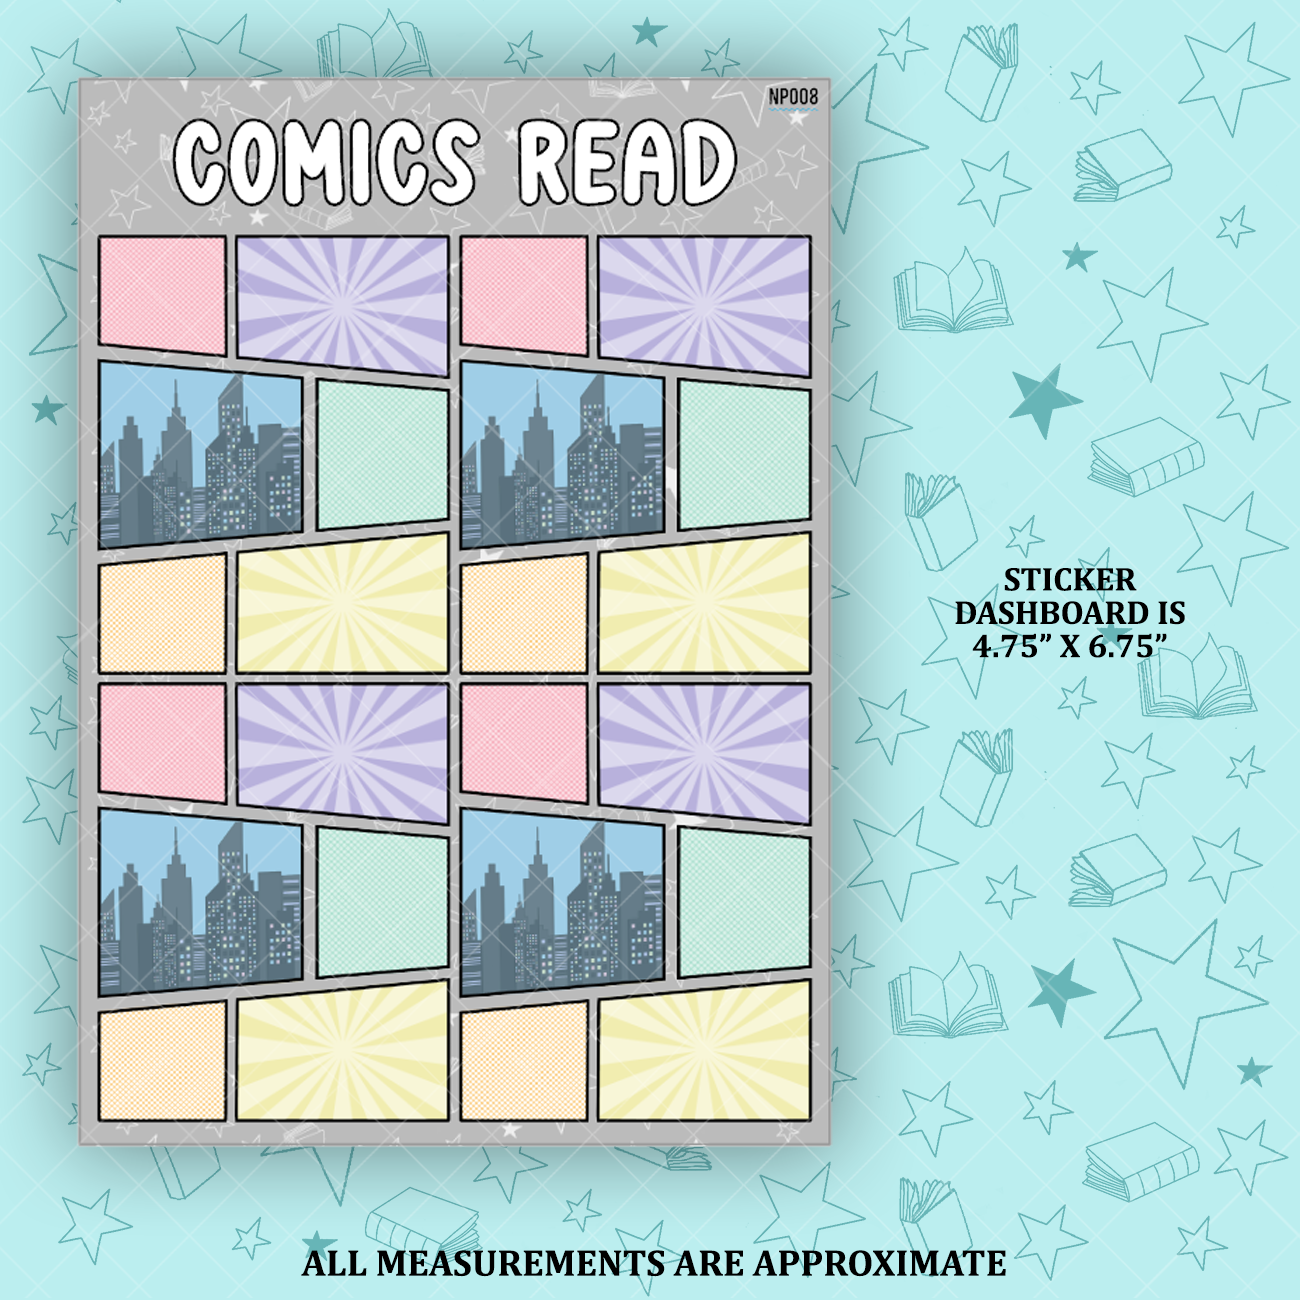 Comics Read Notes Page Sticker Dashboard - NP008